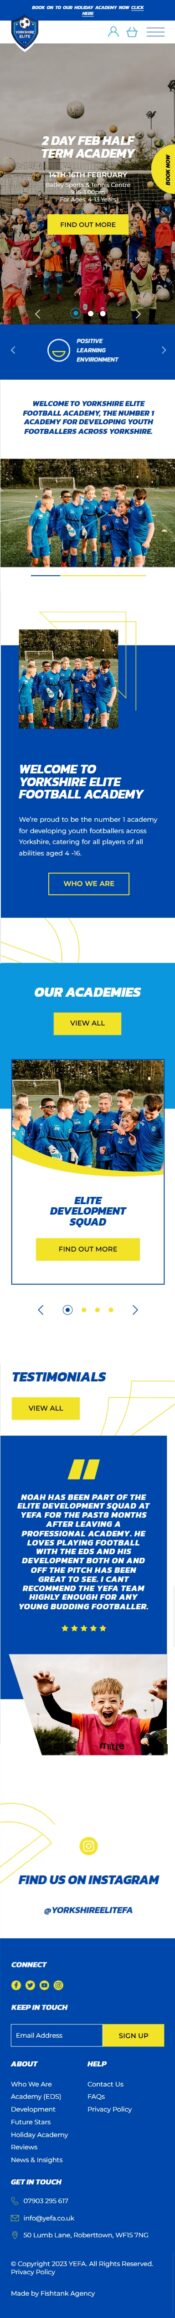 Yorkshire elite football academy community about page